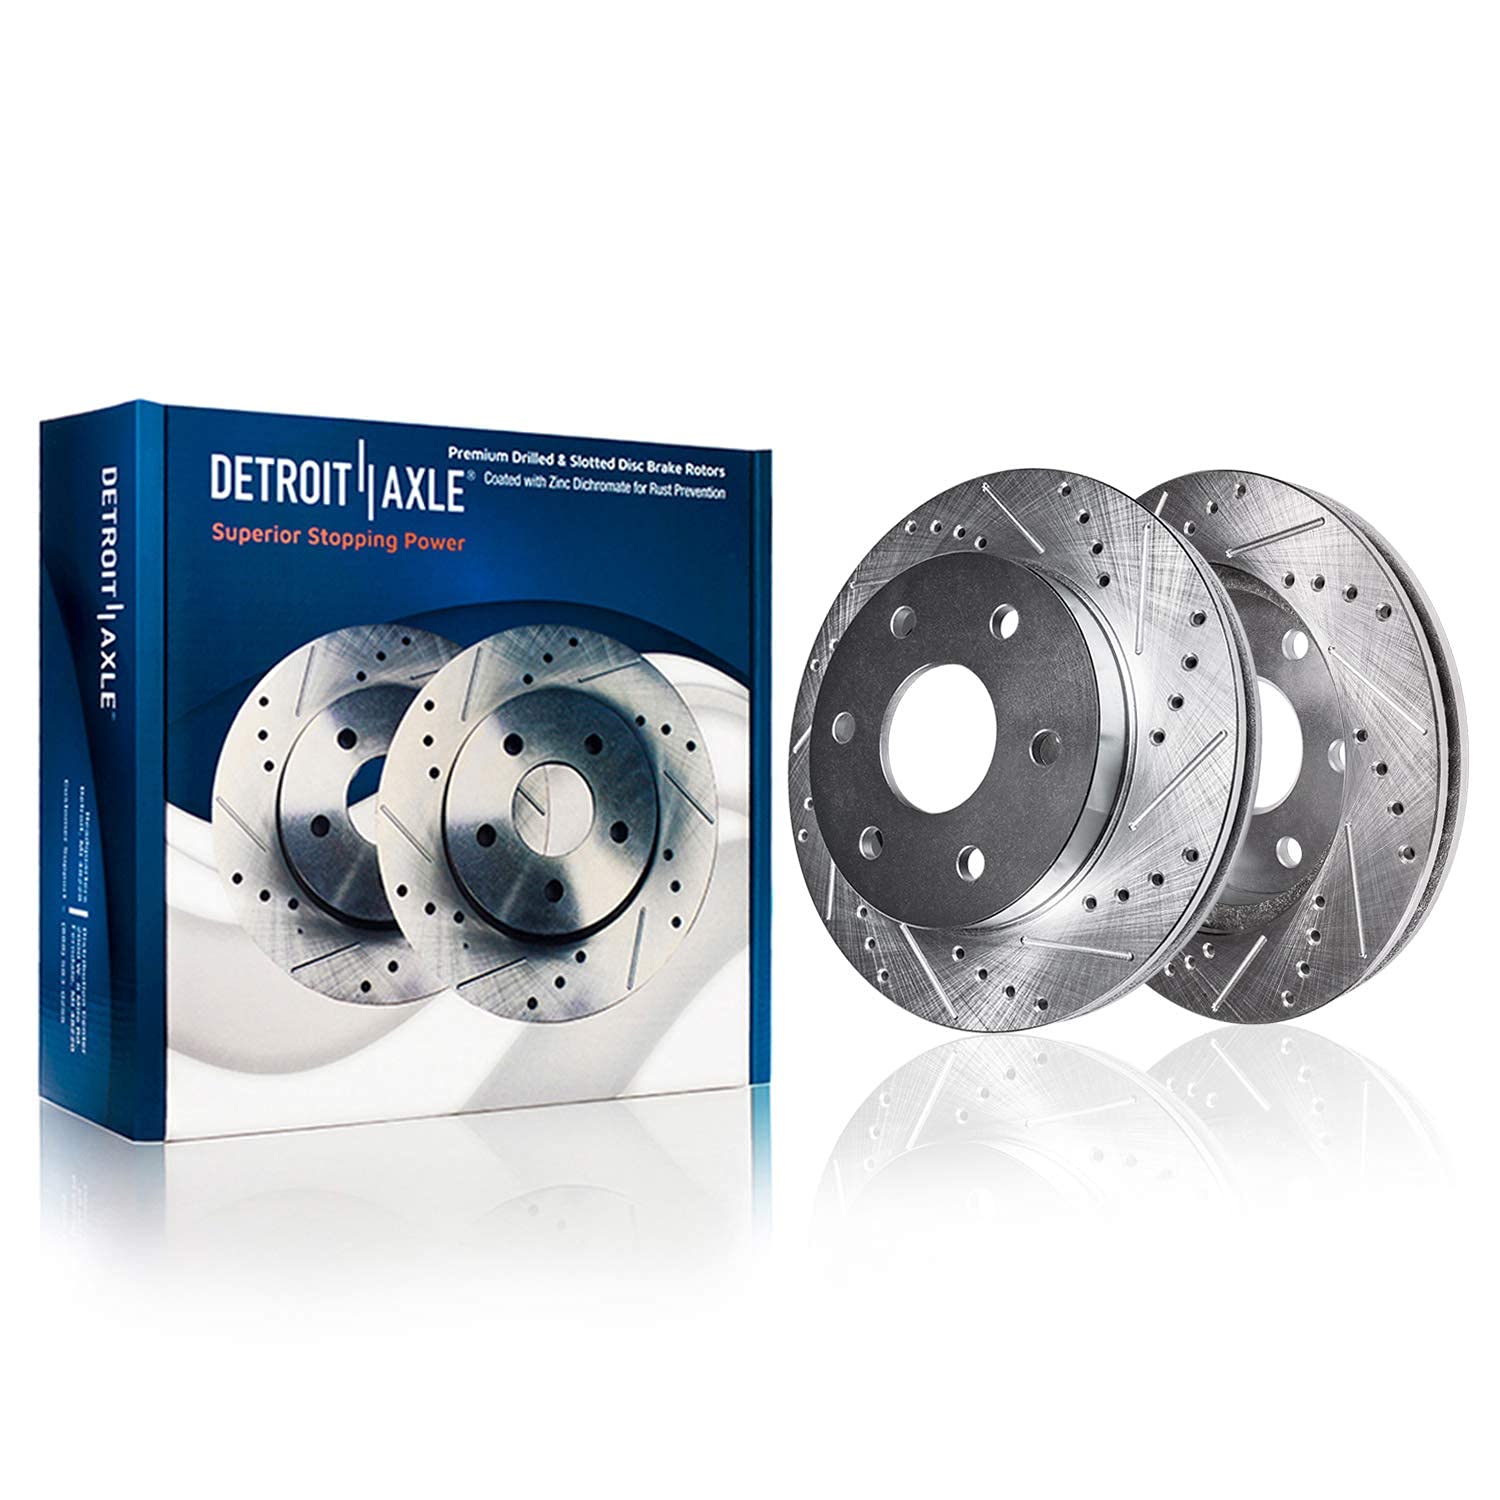 Detroit Axle - Brake Kit for Chevy GMC Silverado Sierra 1500 Yukon Tahoe Astro Drilled & Slotted Disc Brakes Rotors Ceramic Brake Pads Replacement : 12" inch Front Rotor and 12.78" inch Rear Rotor